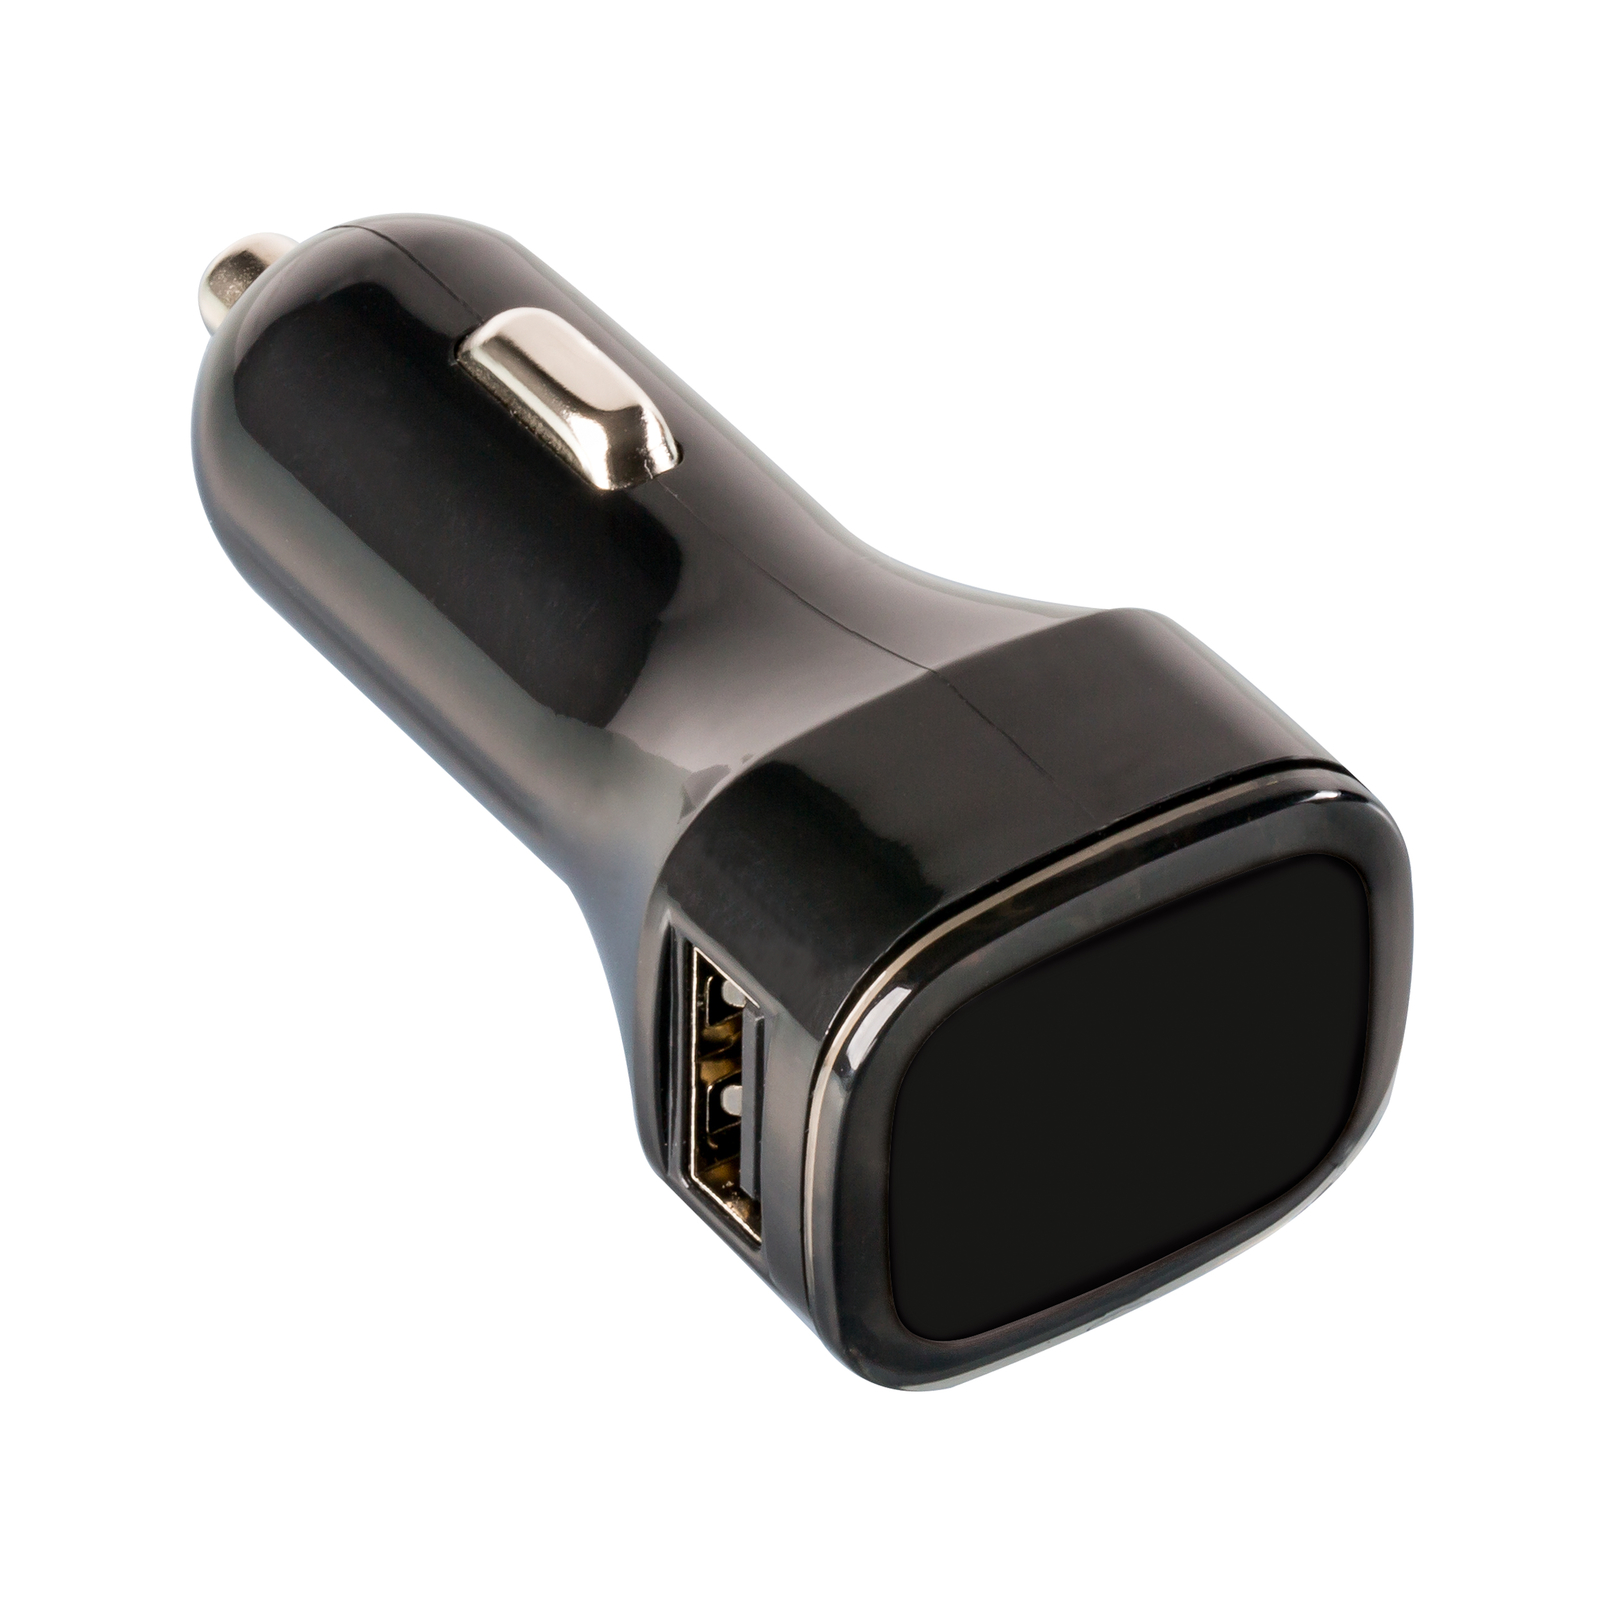 Branded USB car charger adapter RC 500